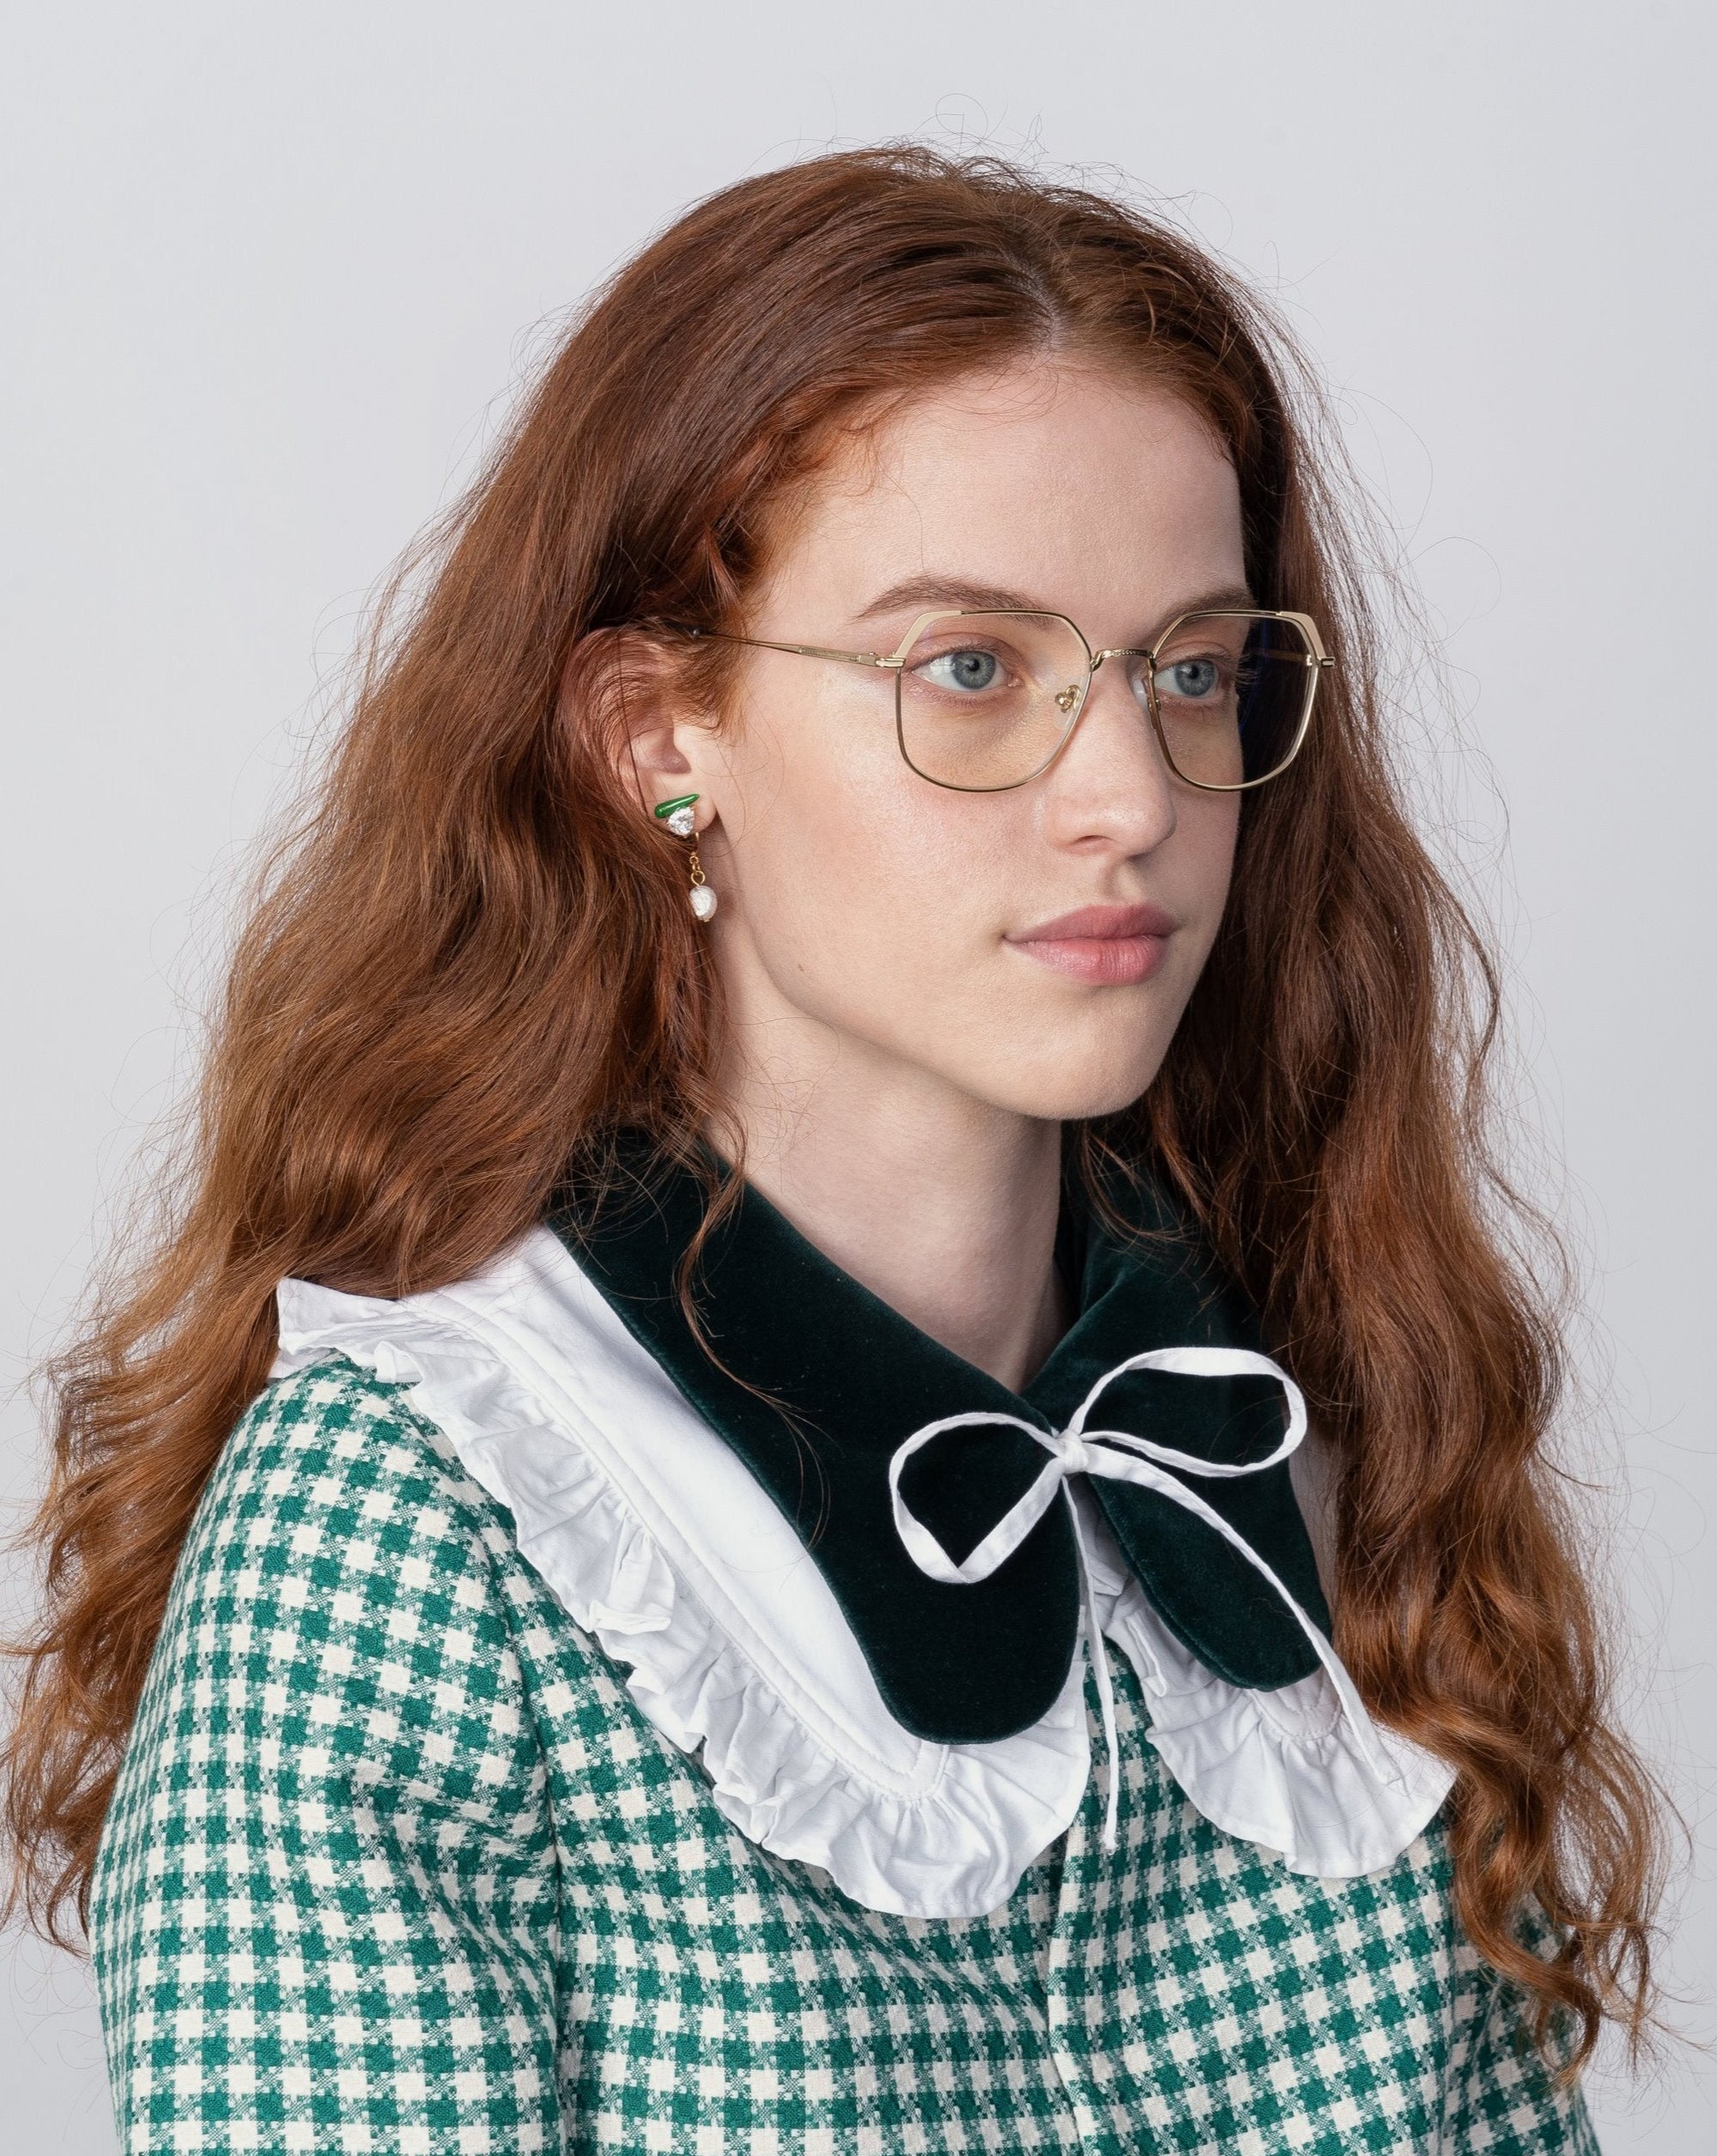 A young woman with long, wavy red hair is wearing Godiva gold-framed glasses with a blue light filter from For Art&#39;s Sake® and a green and white houndstooth dress with a large black and white ruffled collar. She is looking slightly to the side against a plain background.